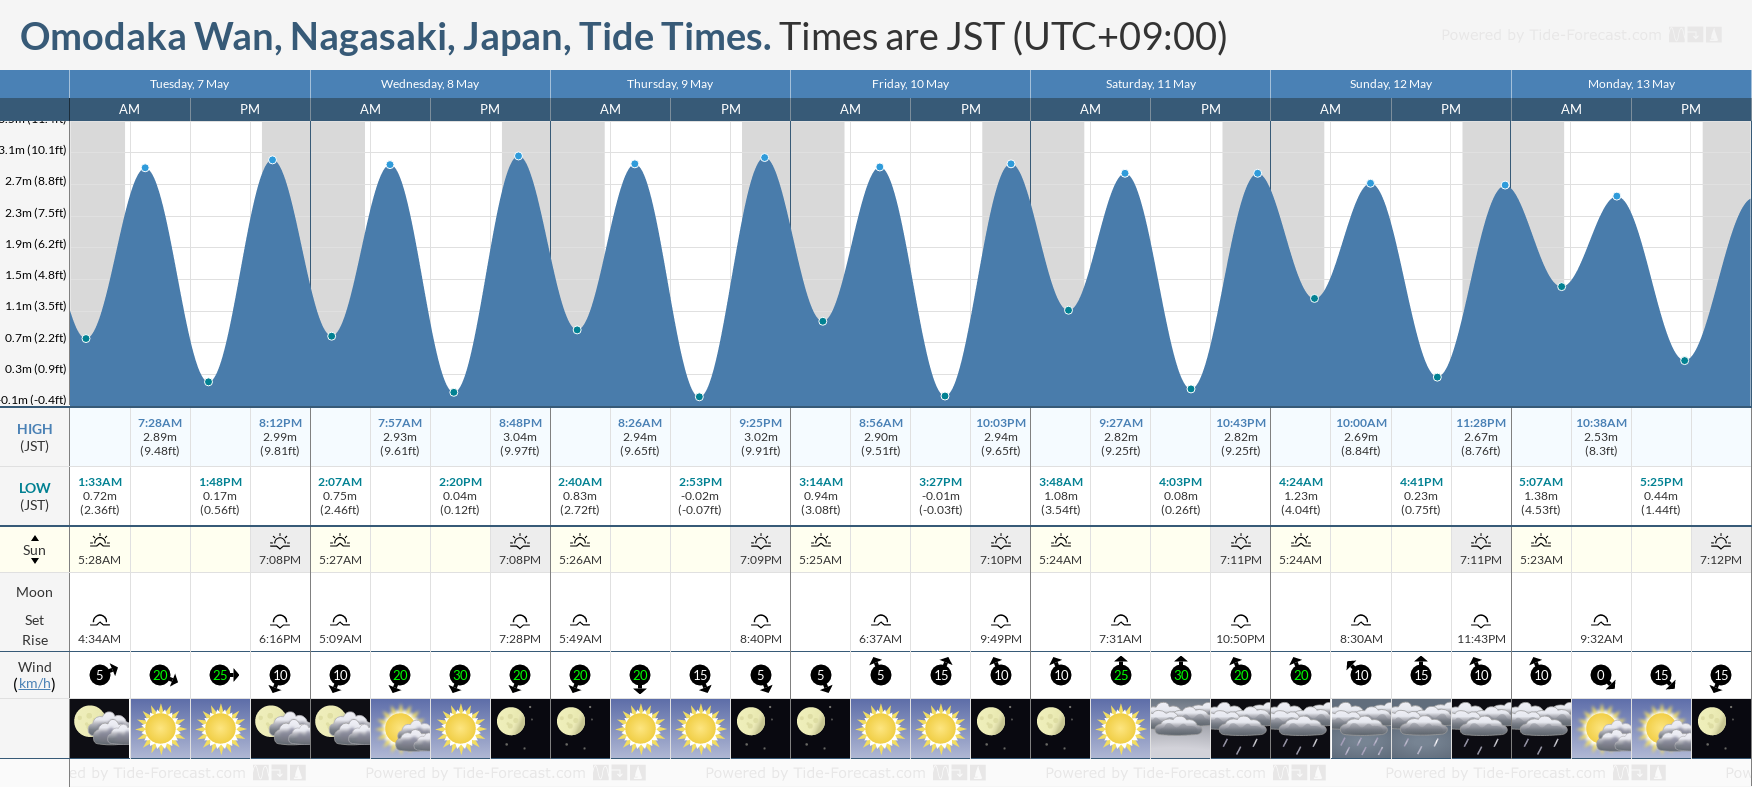 Omodaka Wan, Nagasaki, Japan Tide Chart including high and low tide tide times for the next 7 days